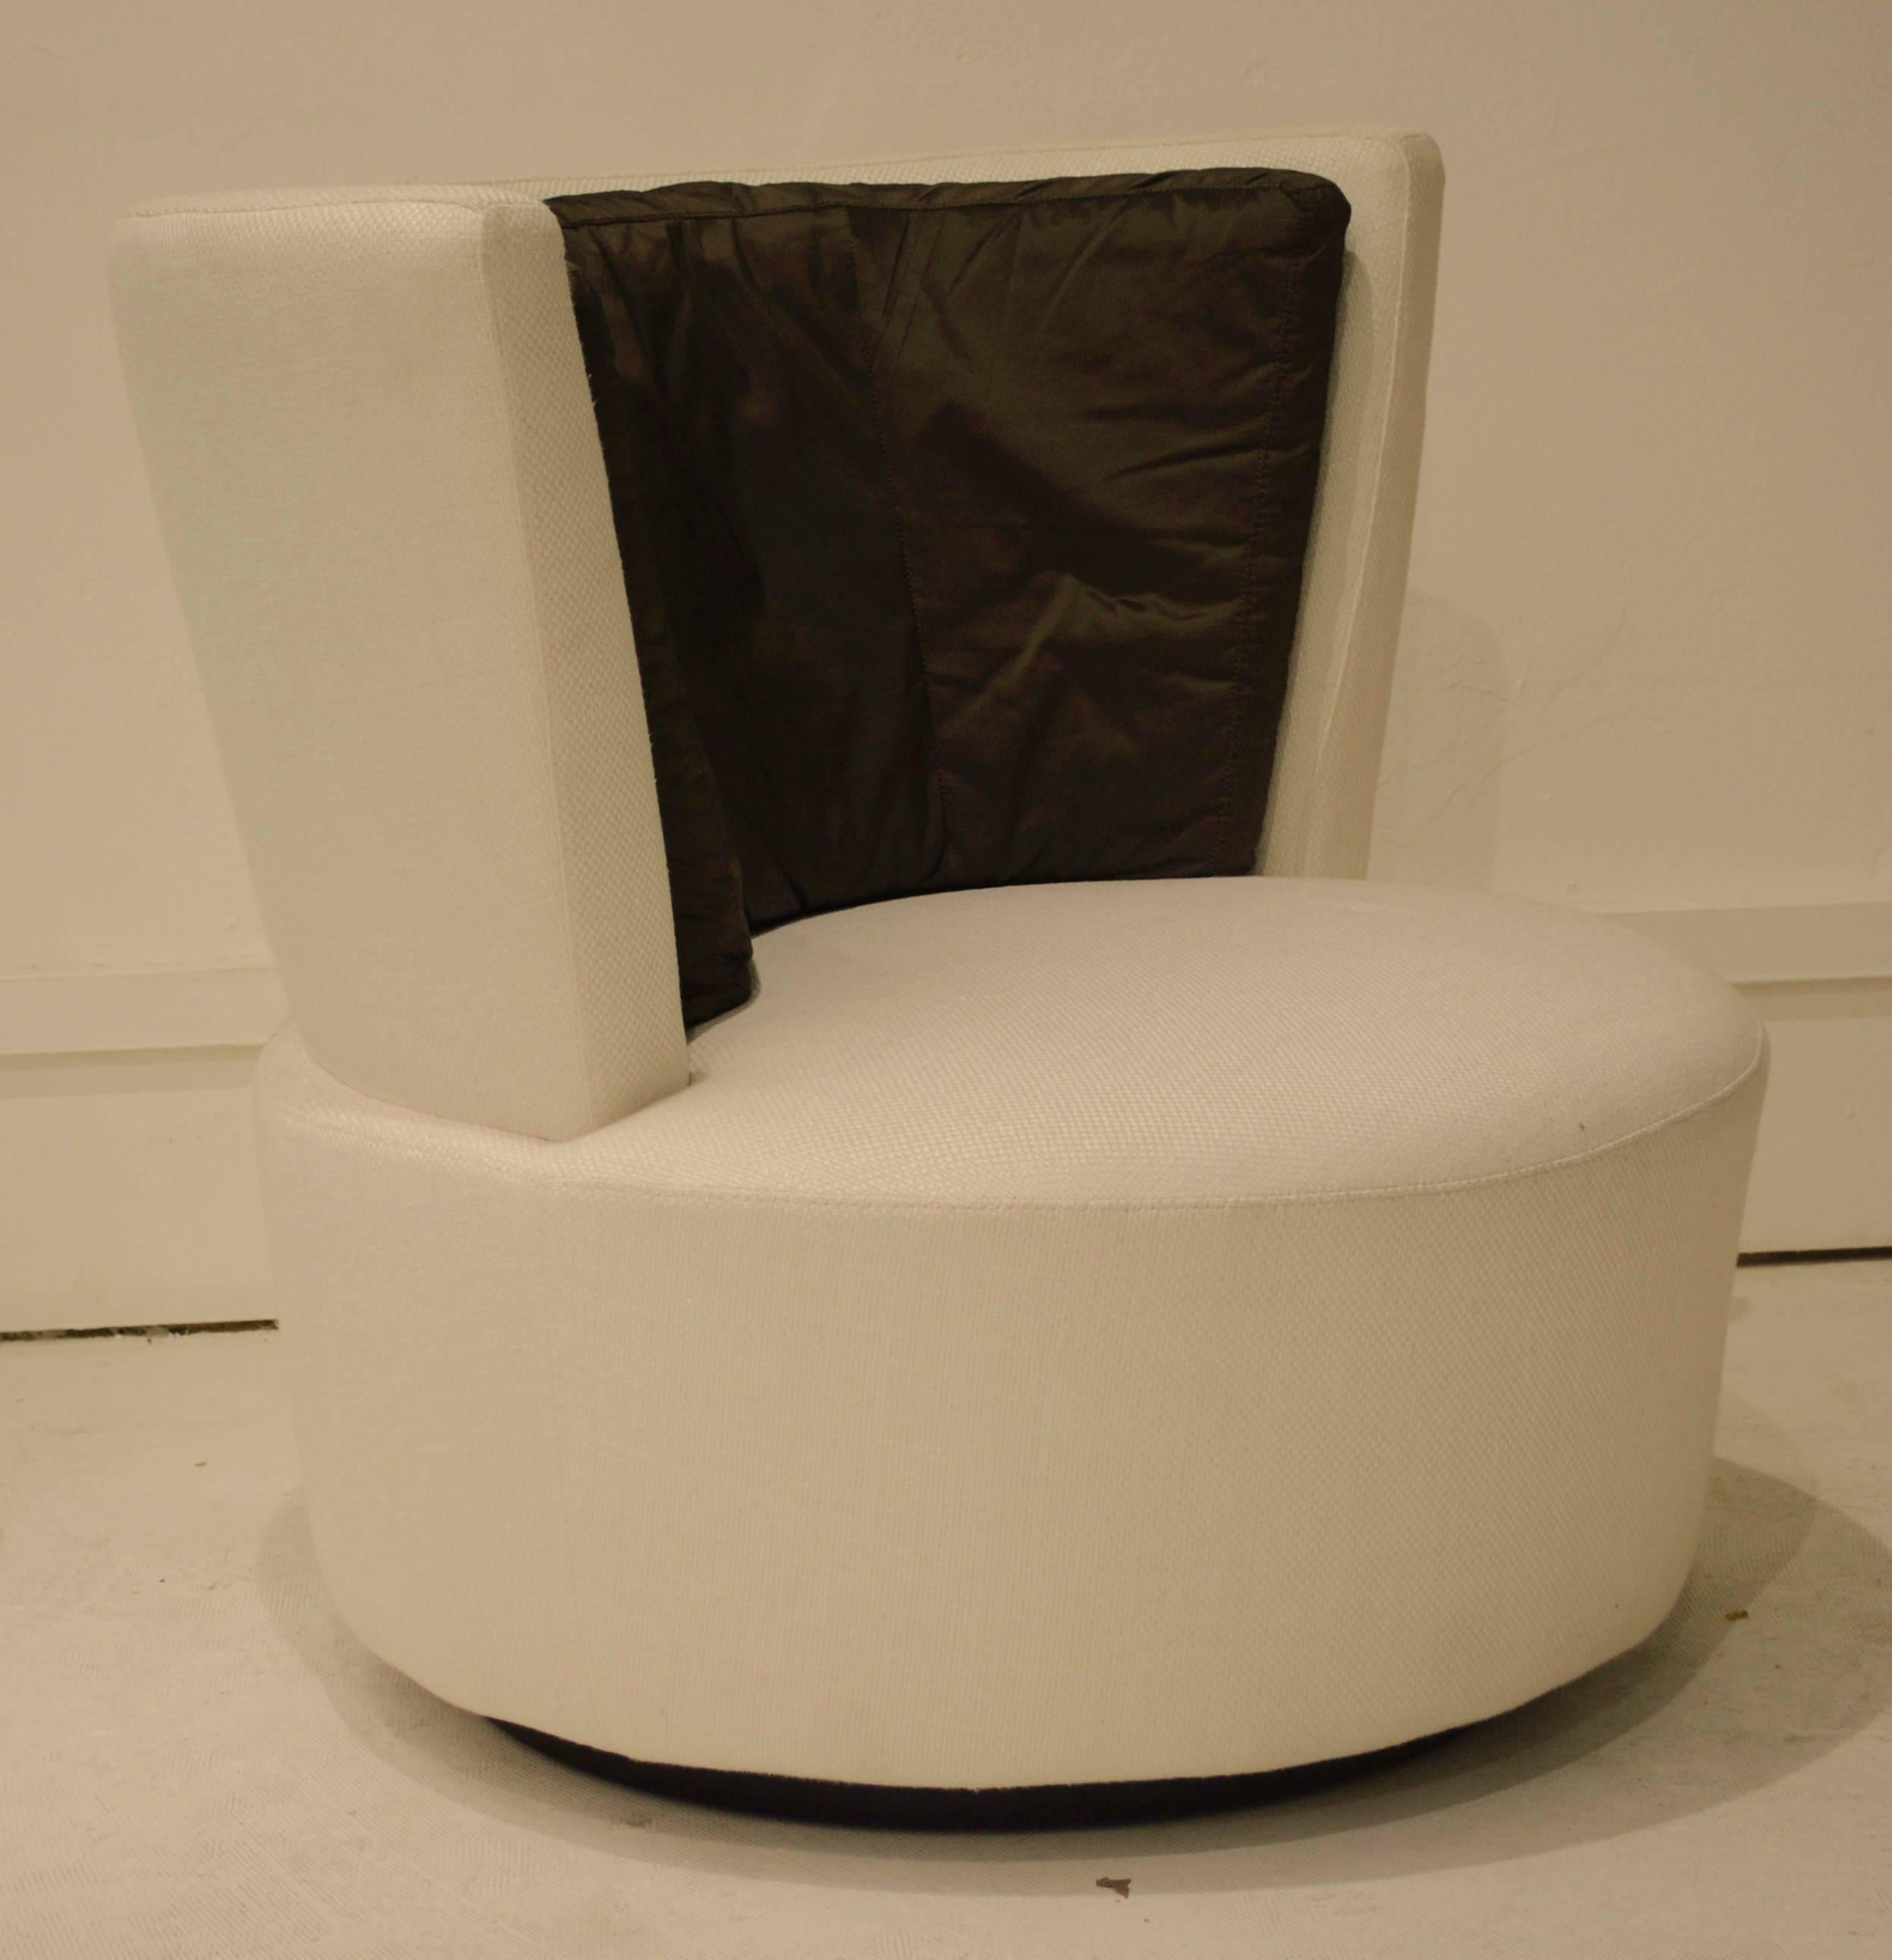 A custom design and unique set of Kagan swivel chairs. The brown and ivory fabric chairs have been the designed for the Lions Club Headquarters at Paris.
We have two pairs available (the other pair that is all ivory is for sale in one of our other